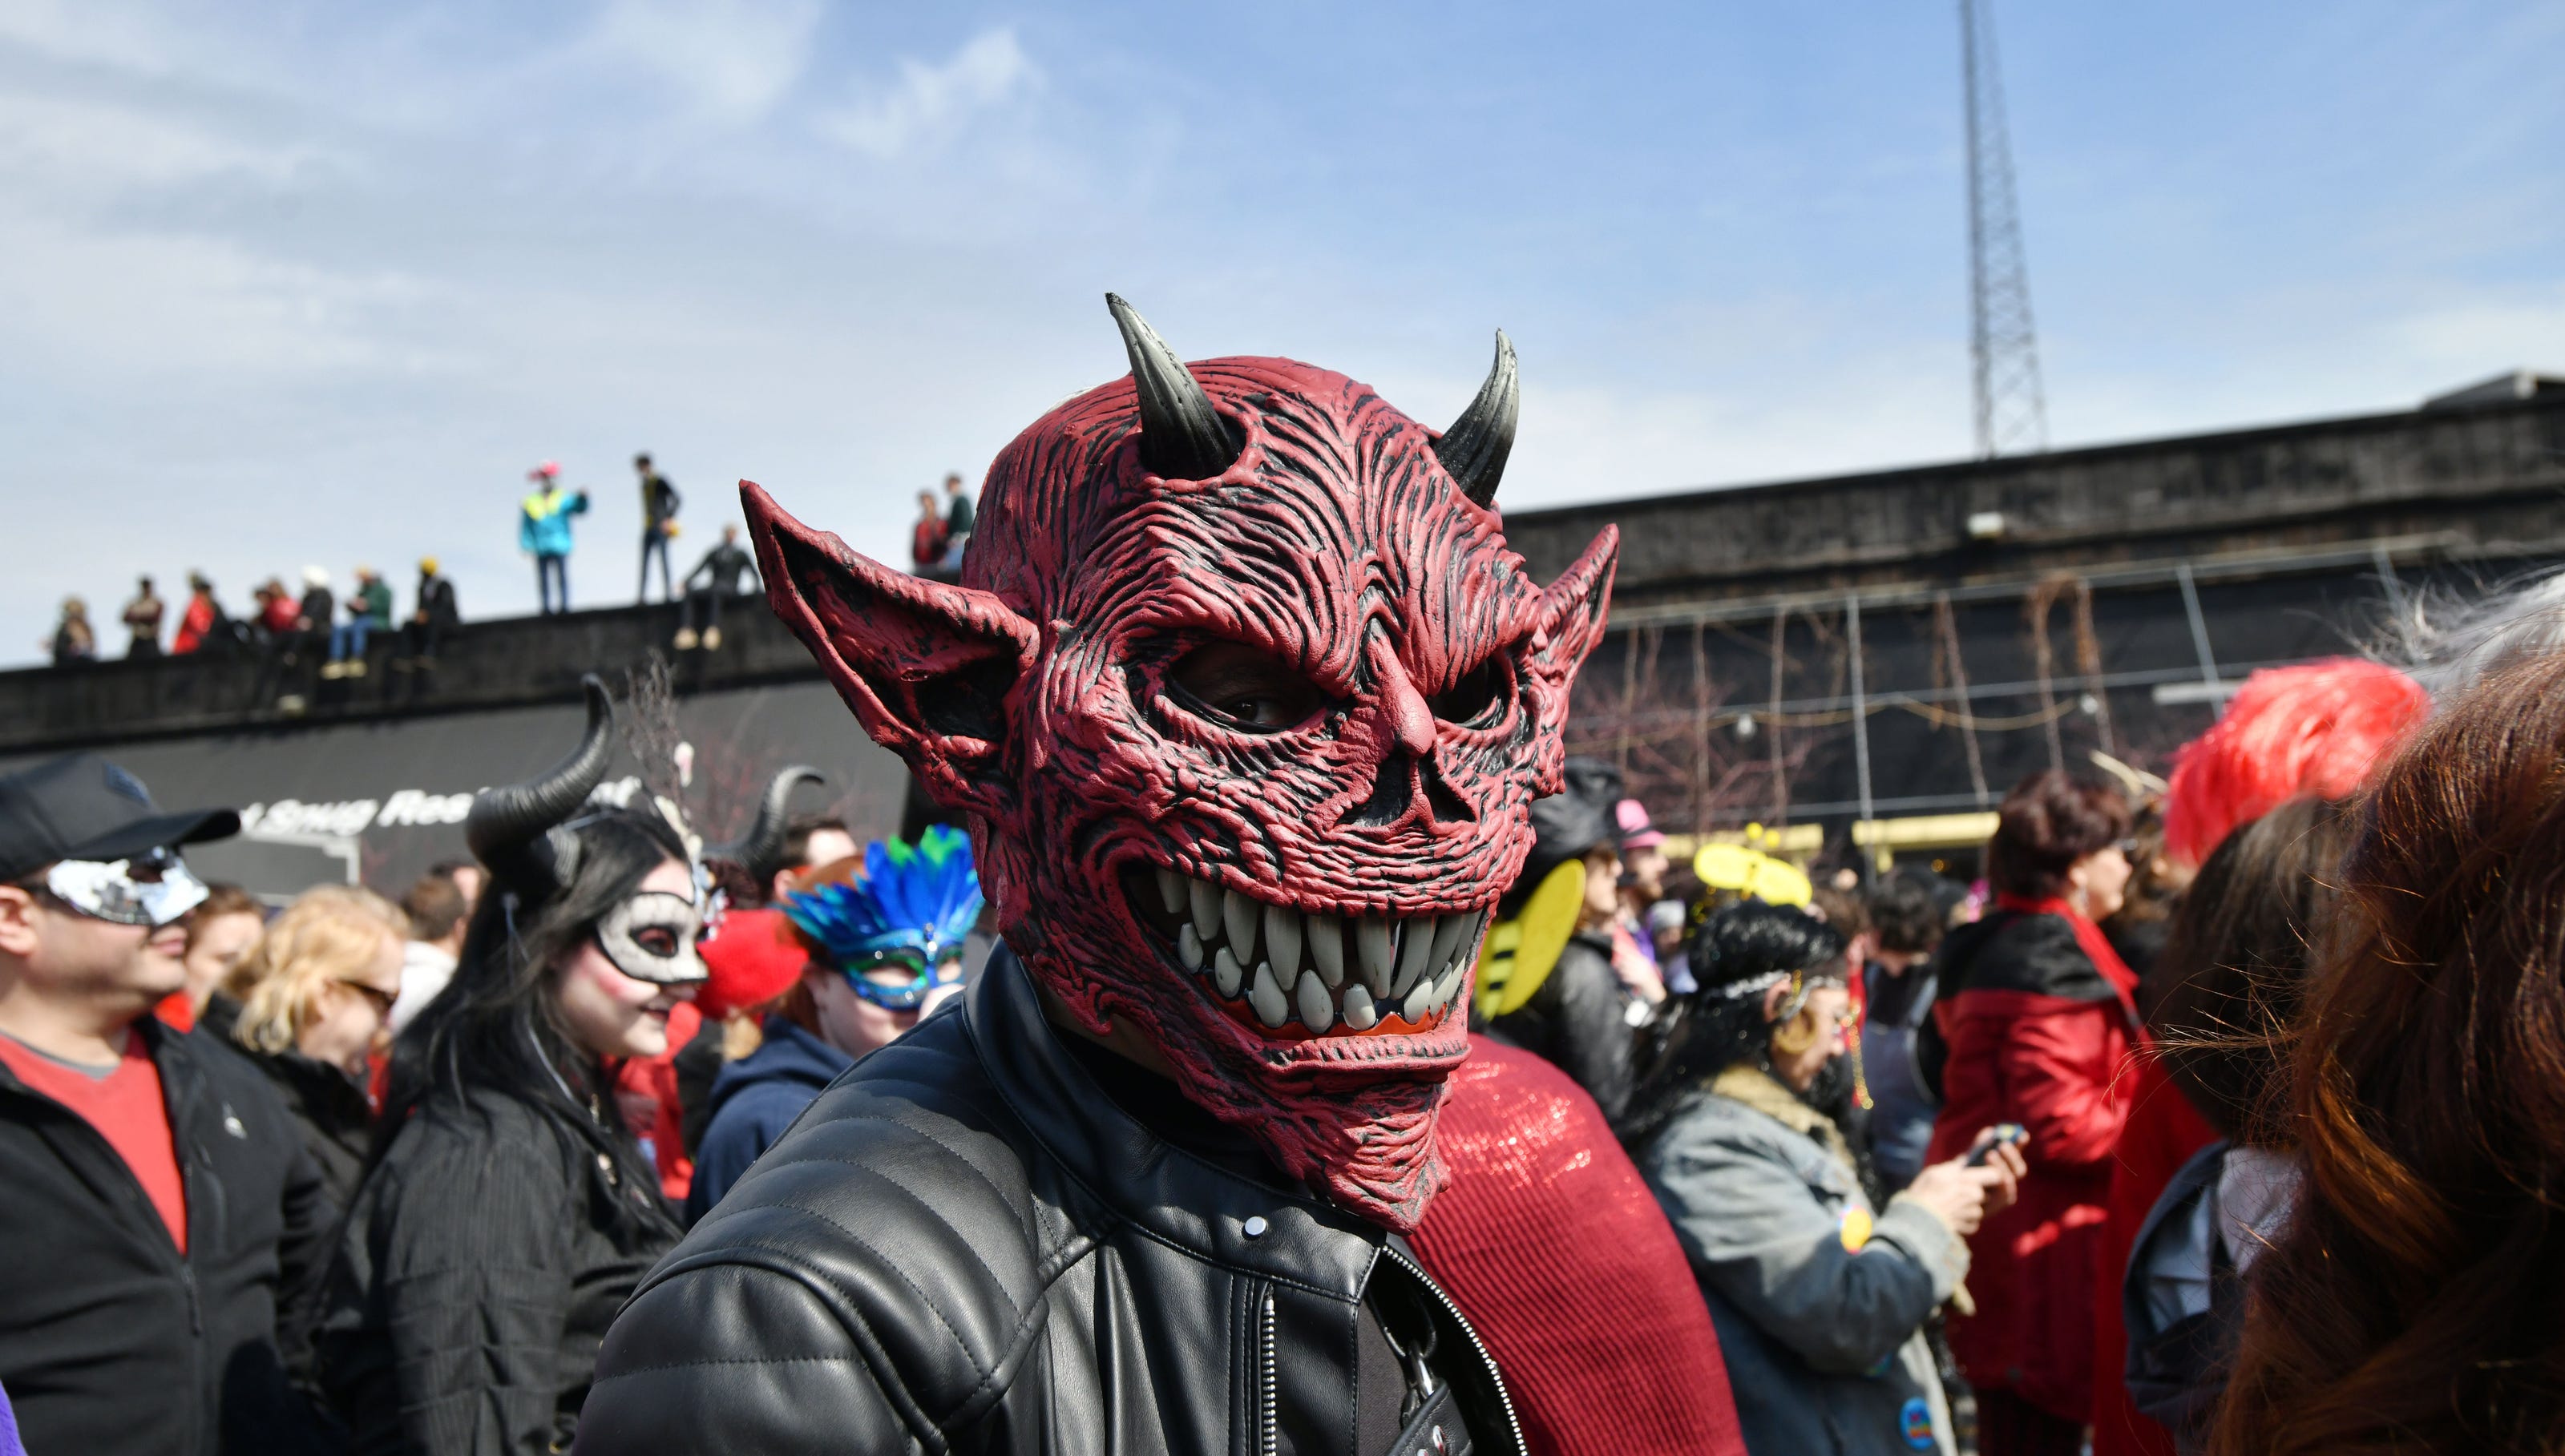 MICHIGAN: THE NAIN ROUGE.Detroit is haunted by a small impish hobgoblin who predicts misfortune and has cursed the city. He was seen in the 1805 fire, which nearly destroyed the whole city, the 1968 riots, and the 1976 ice storm. Today, a banishment parade is thrown yearly.